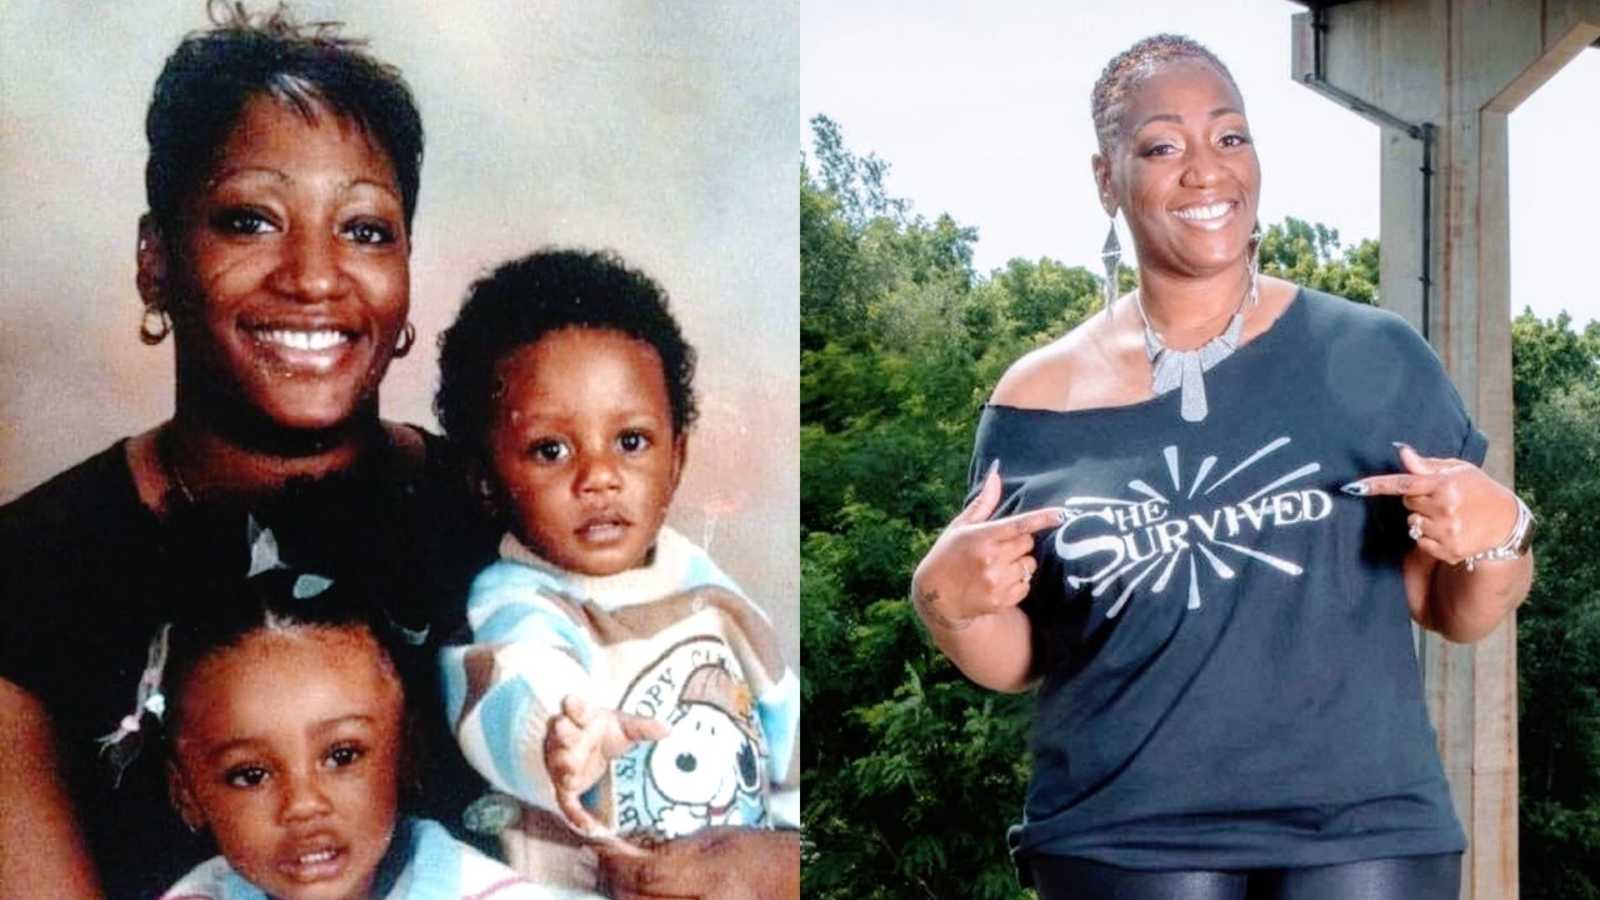 A mother and her two young children and an abuse survivor points to her shirt